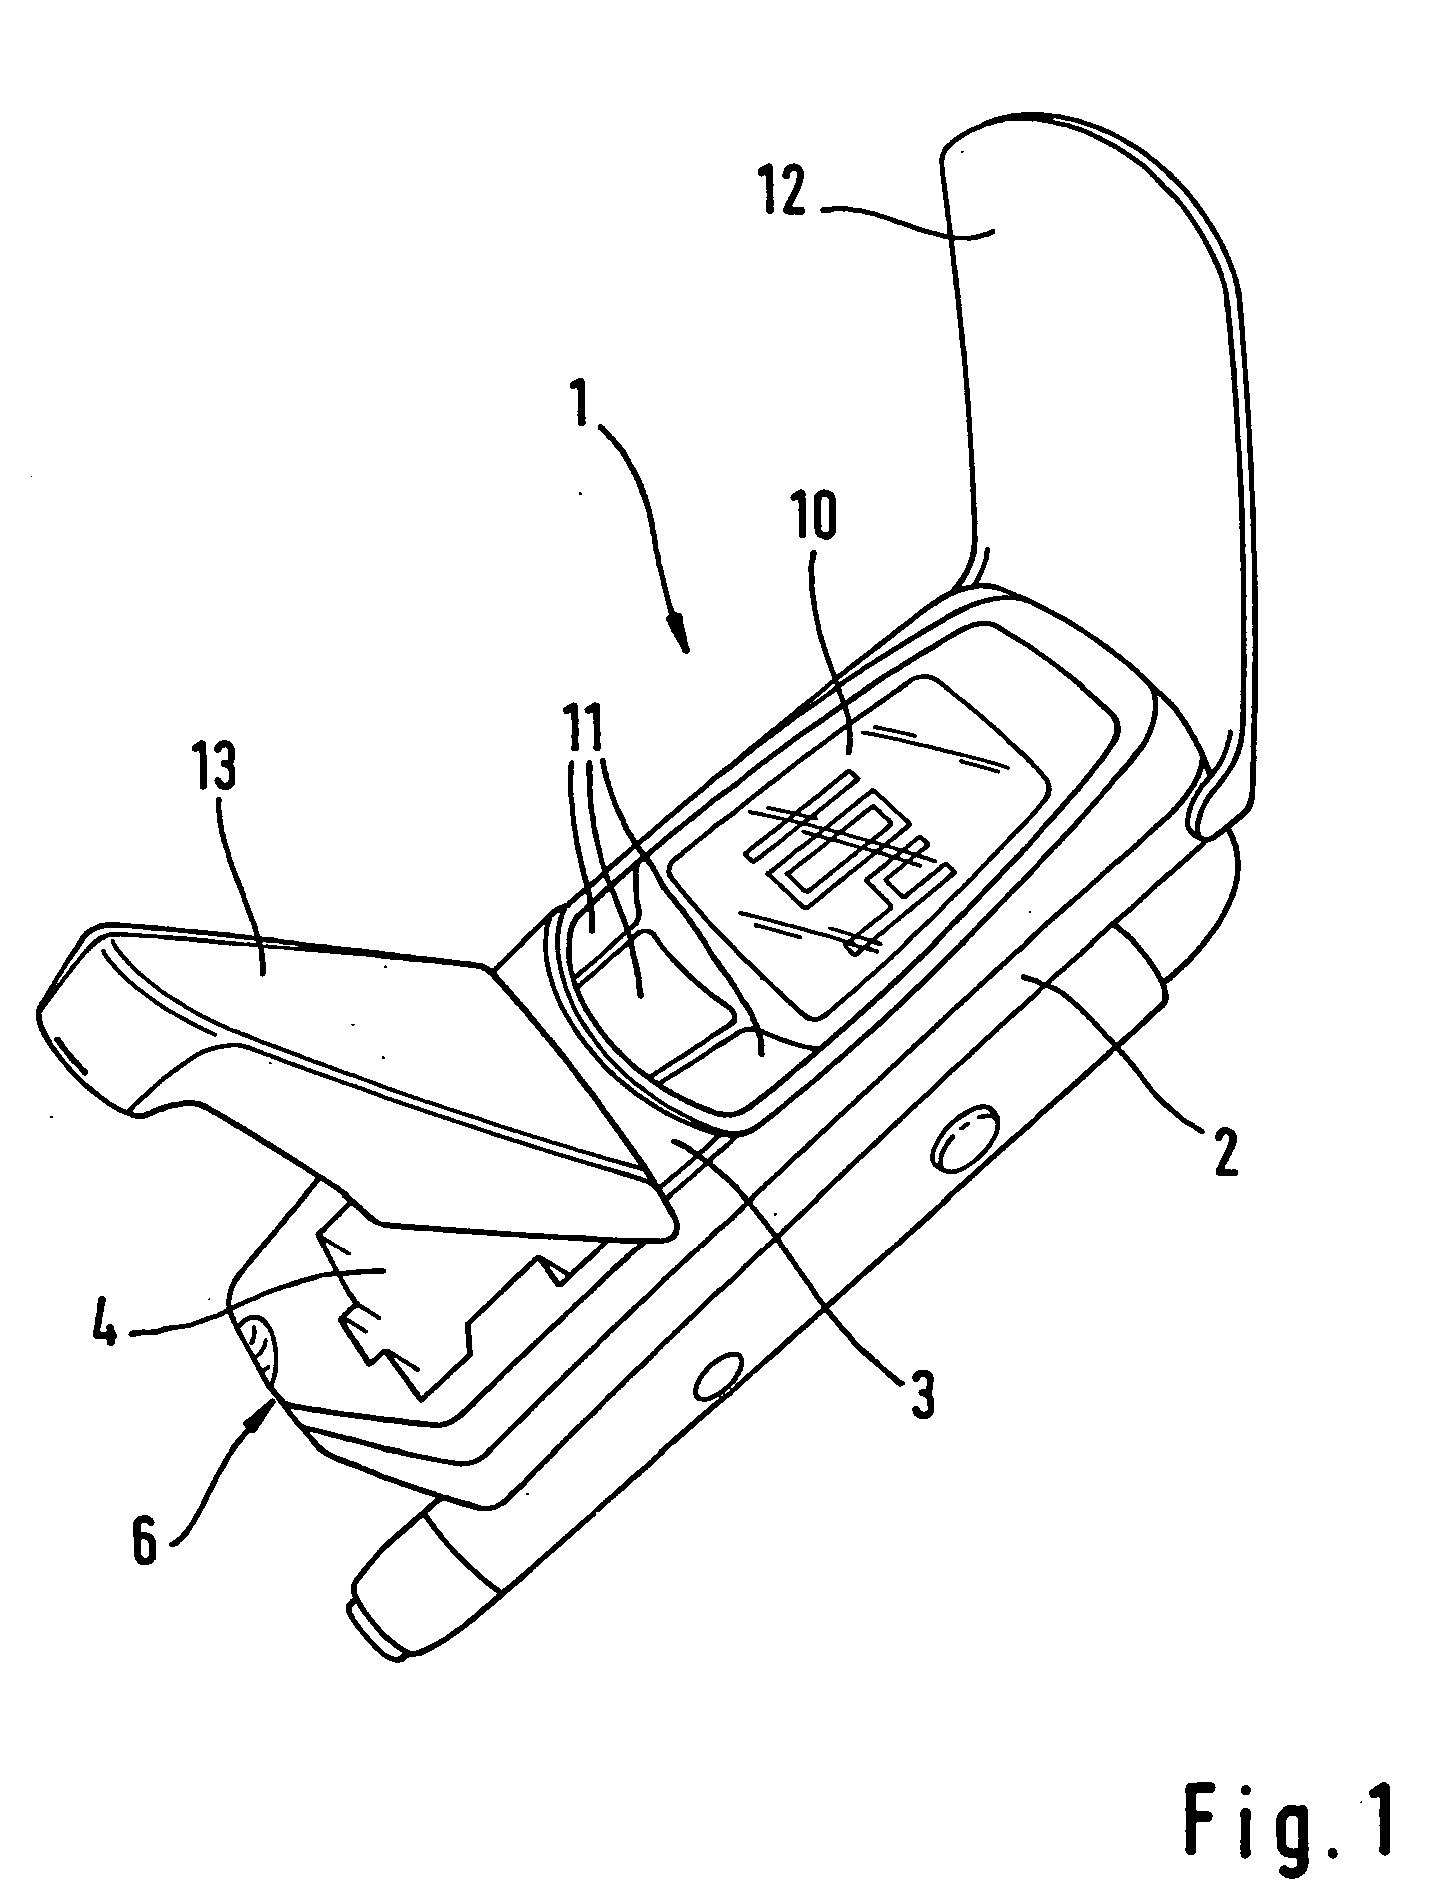 Hand-held analytical device